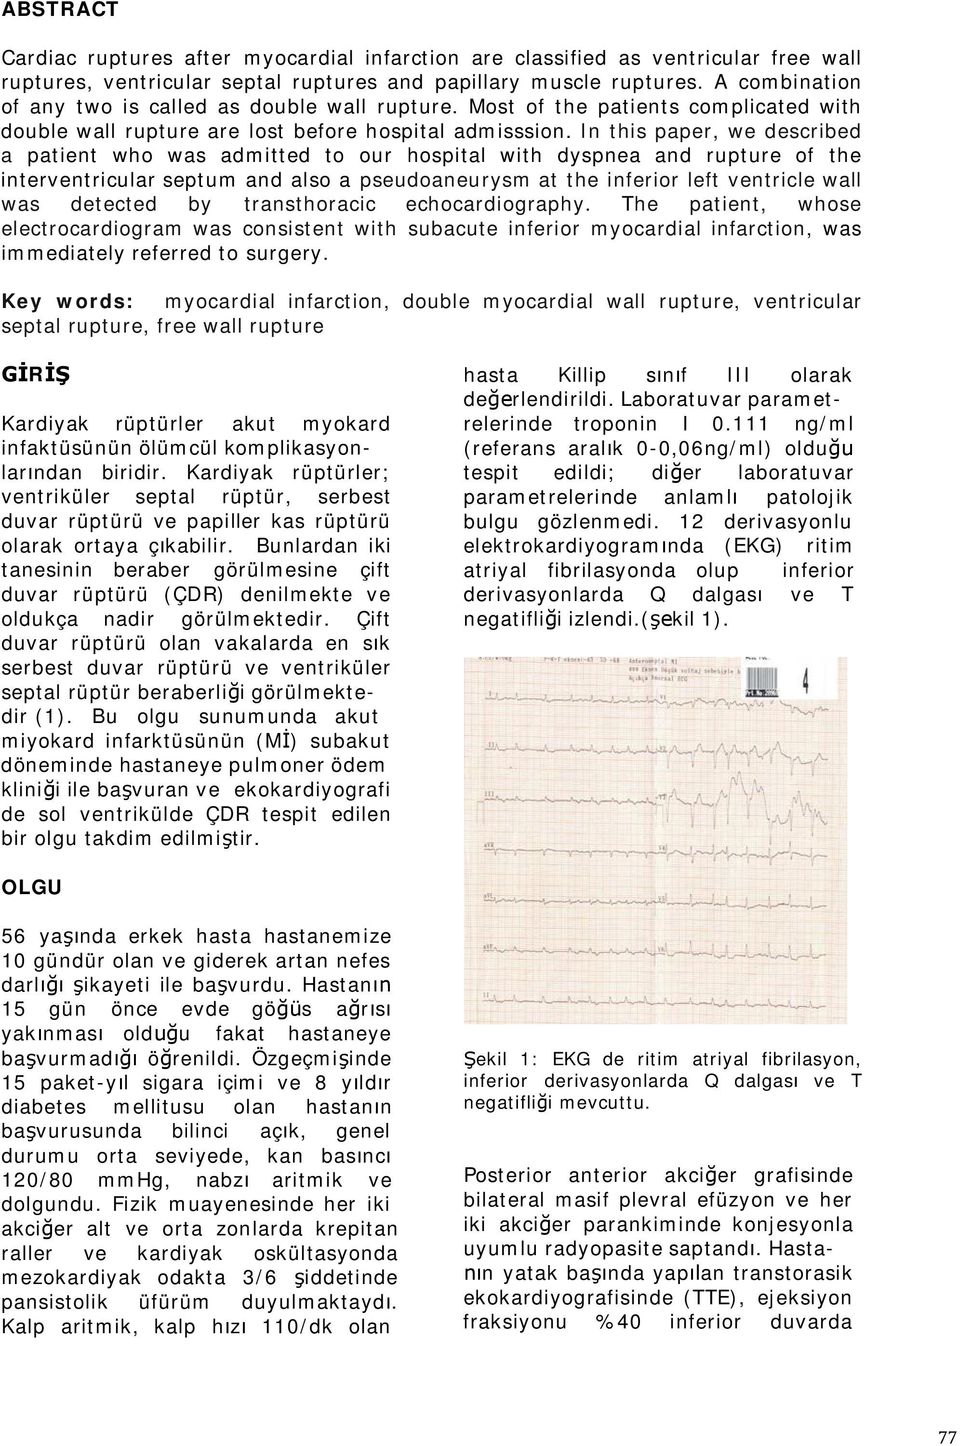 In this paper, we described a patient who was admitted to our hospital with dyspnea and rupture of the interventricular septum and also a pseudoaneurysm at the inferior left ventricle wall was